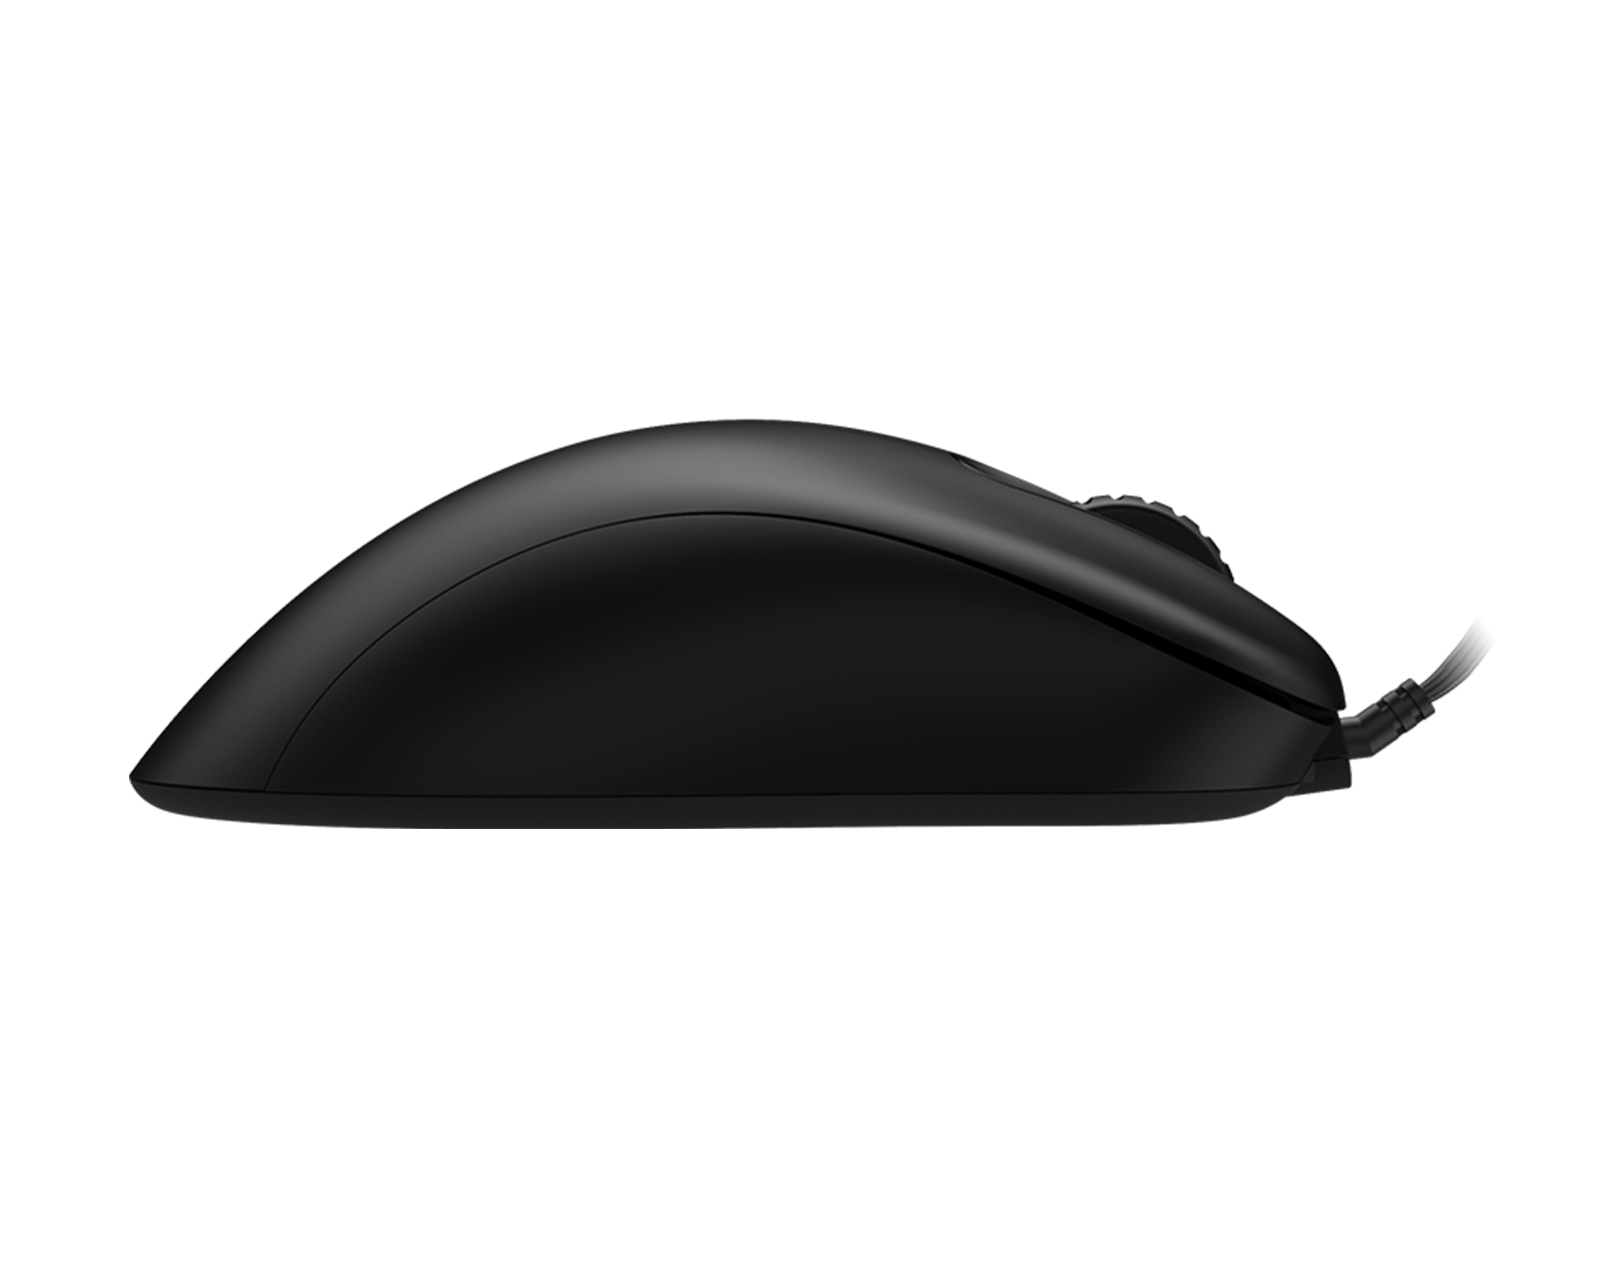 ZOWIE by BenQ EC1-C Gaming Mouse - us.MaxGaming.com